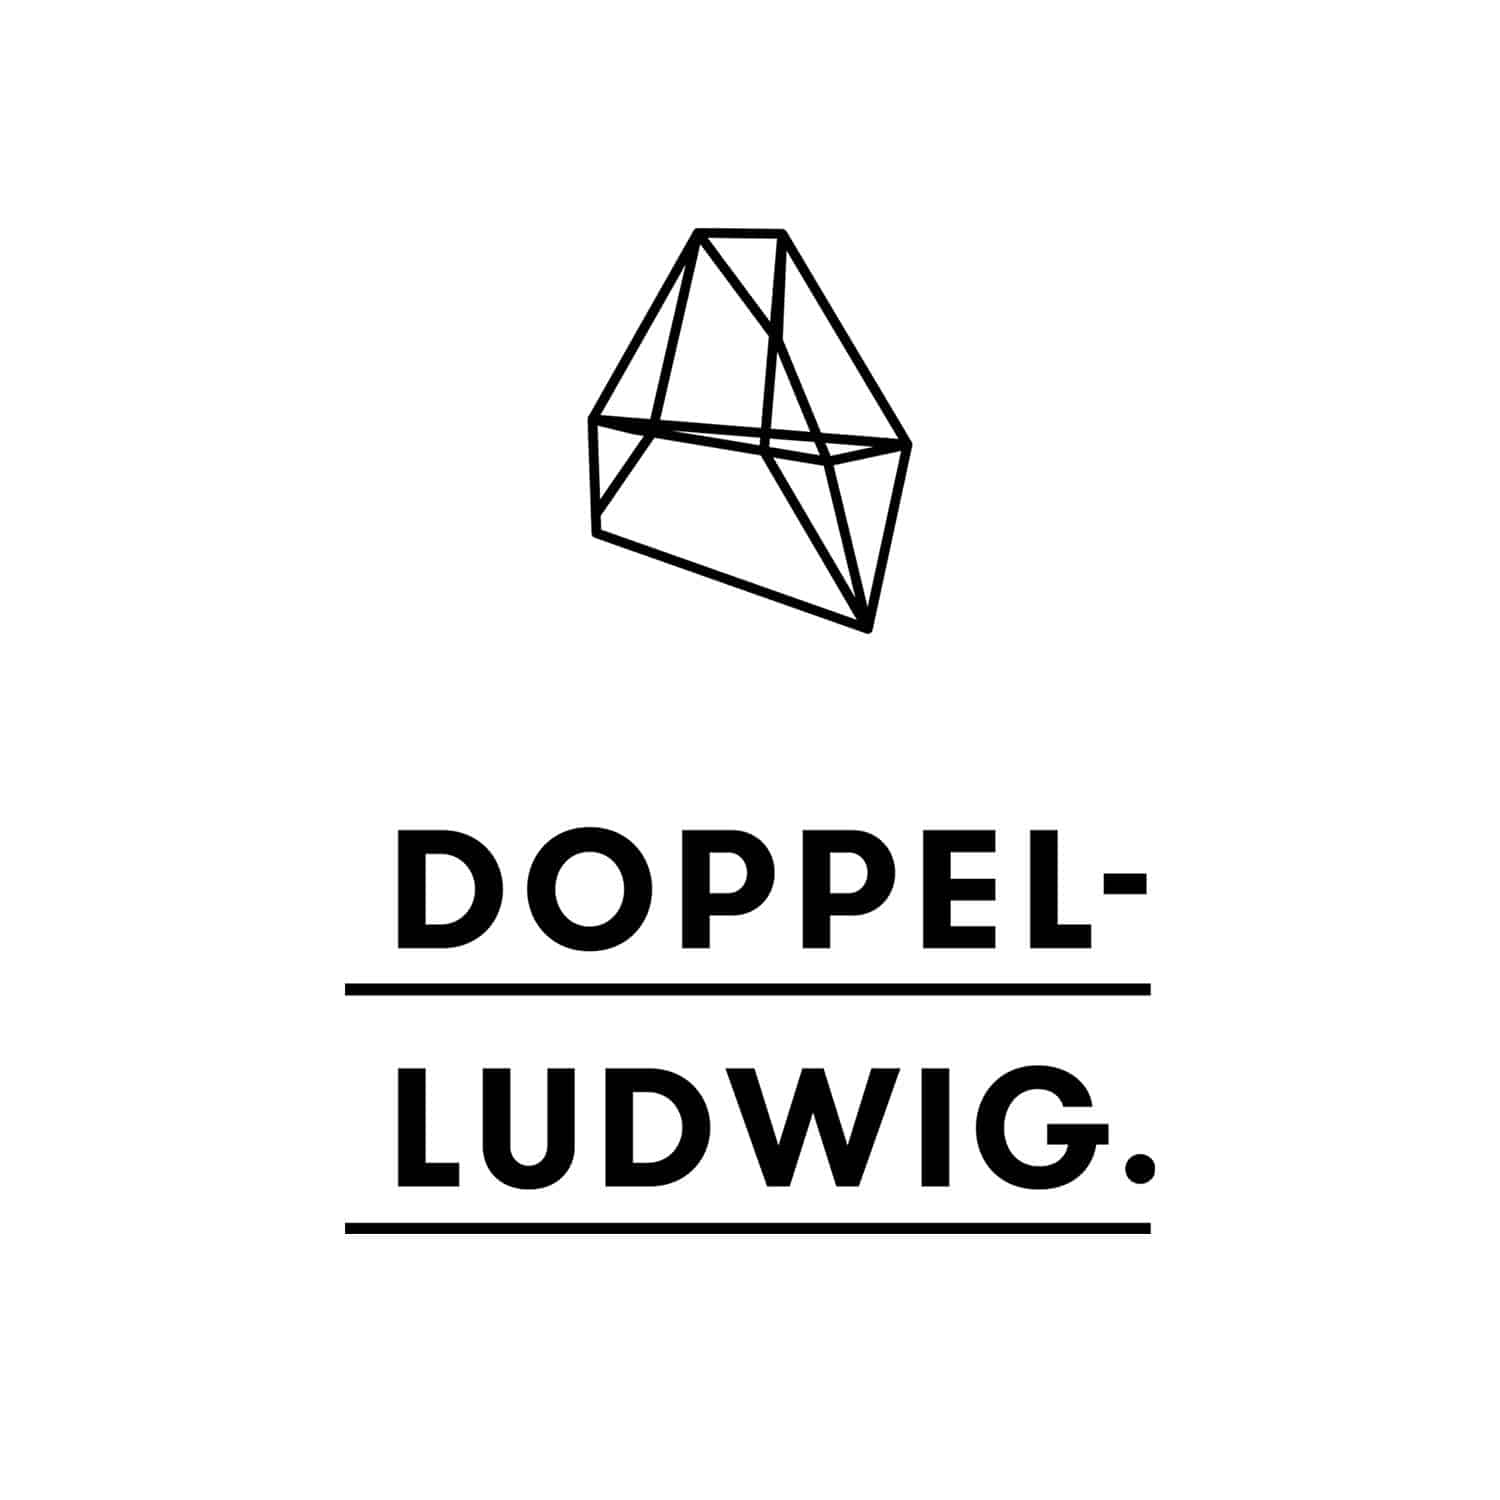 DOPPELLUDWIG